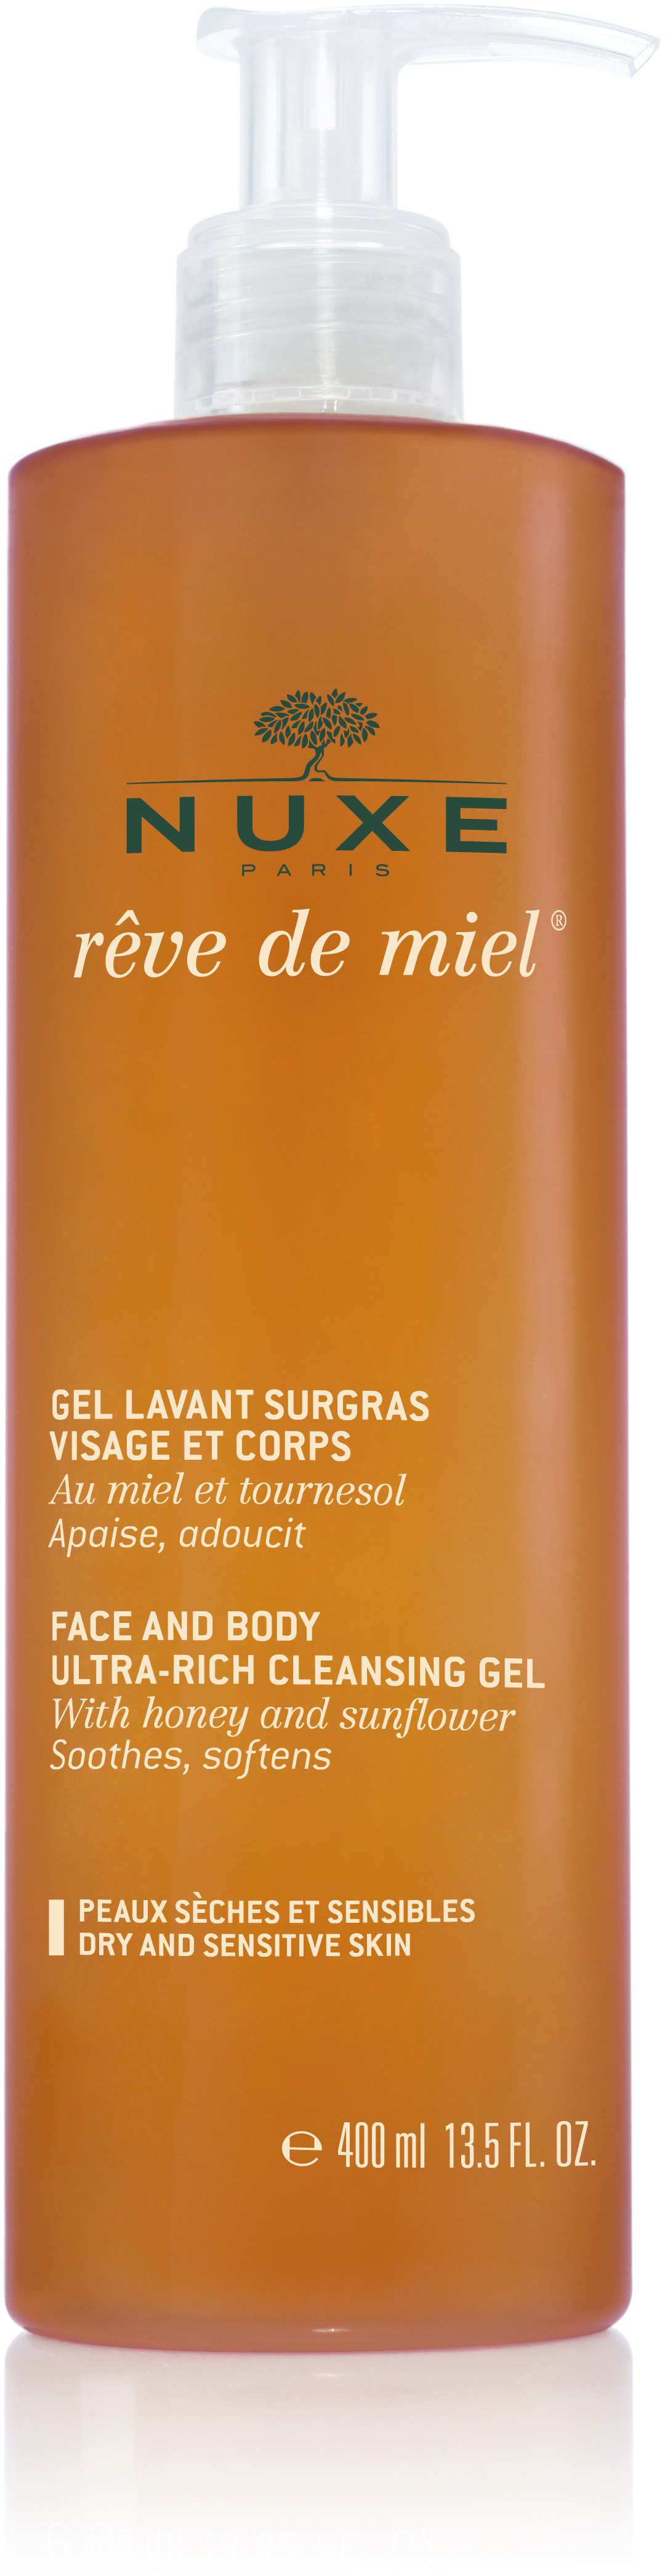 NUXE Rêve De Miel Face and Body Ultra-rich Cleansing Gel 400 ml